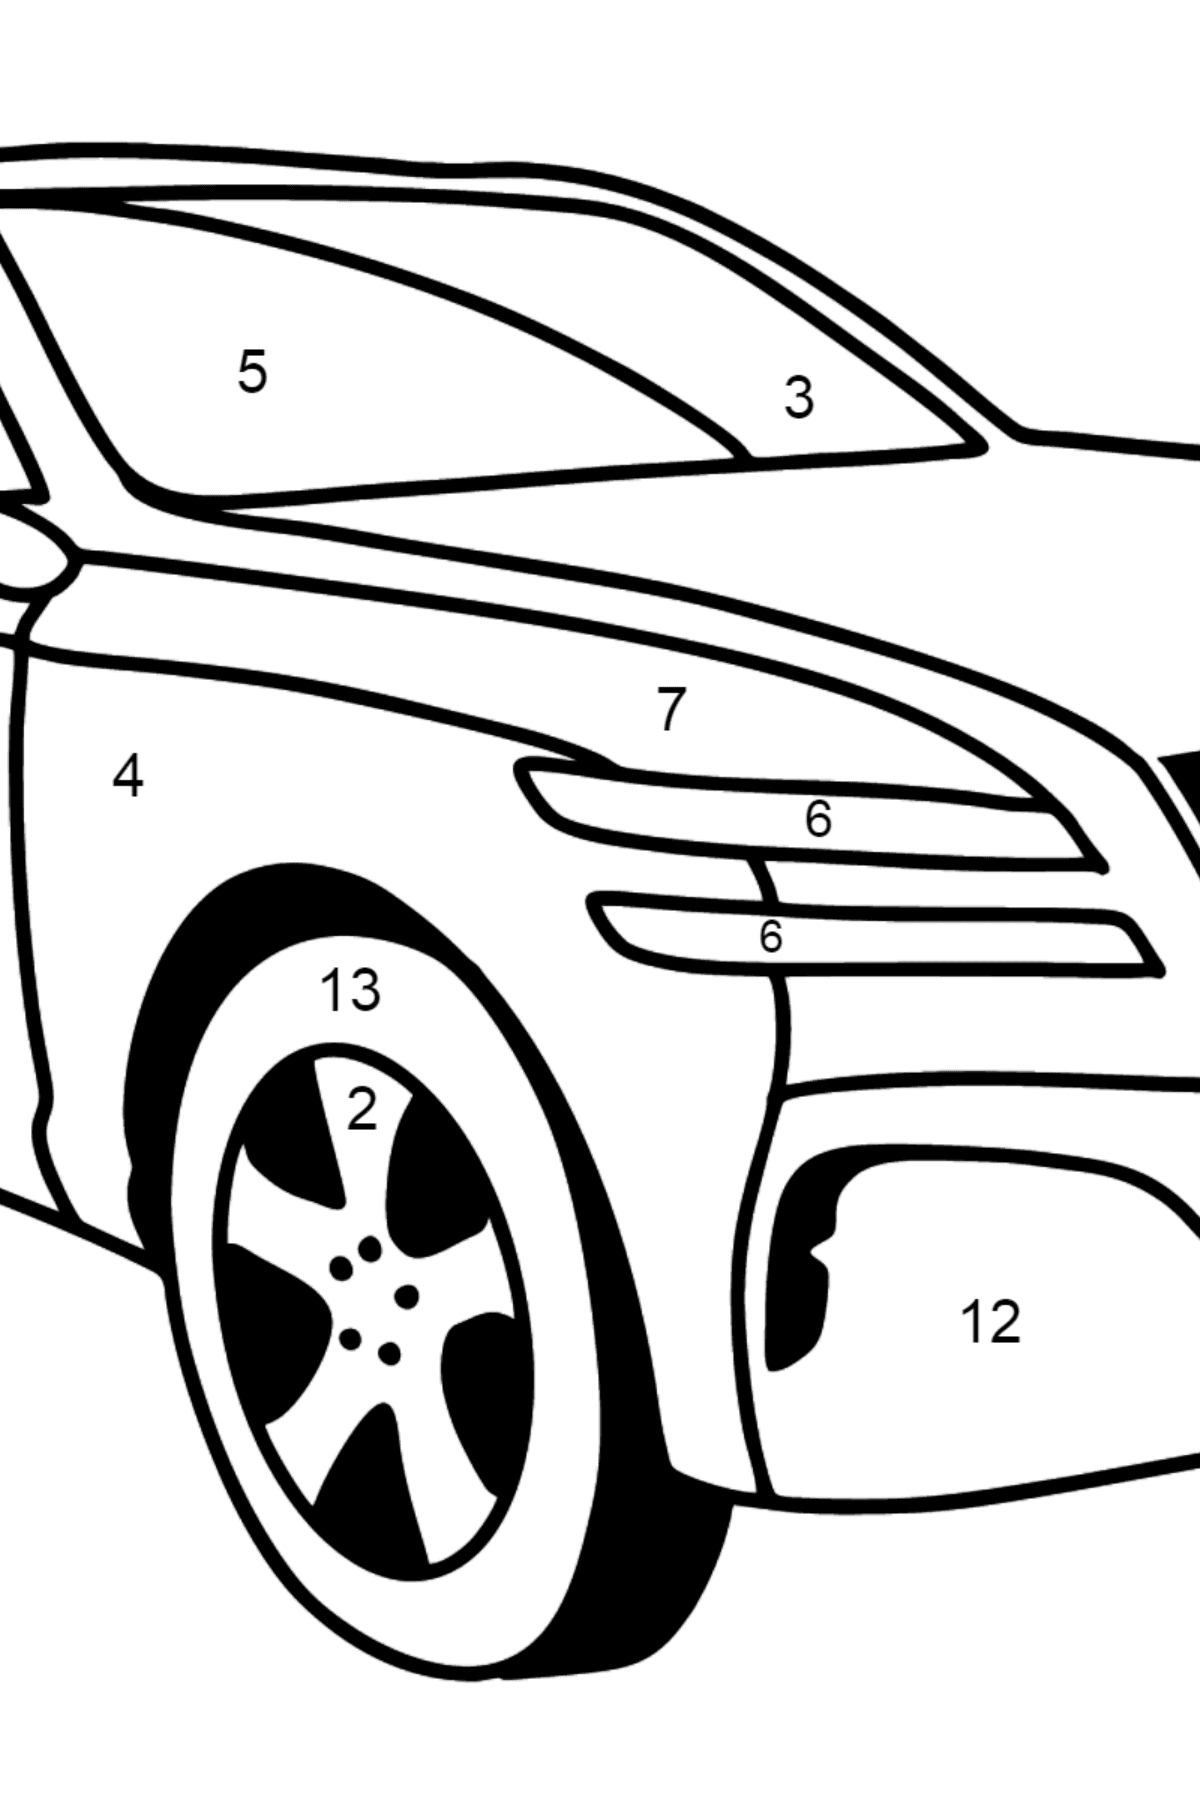 Genesis car coloring page - Coloring by Numbers for Kids